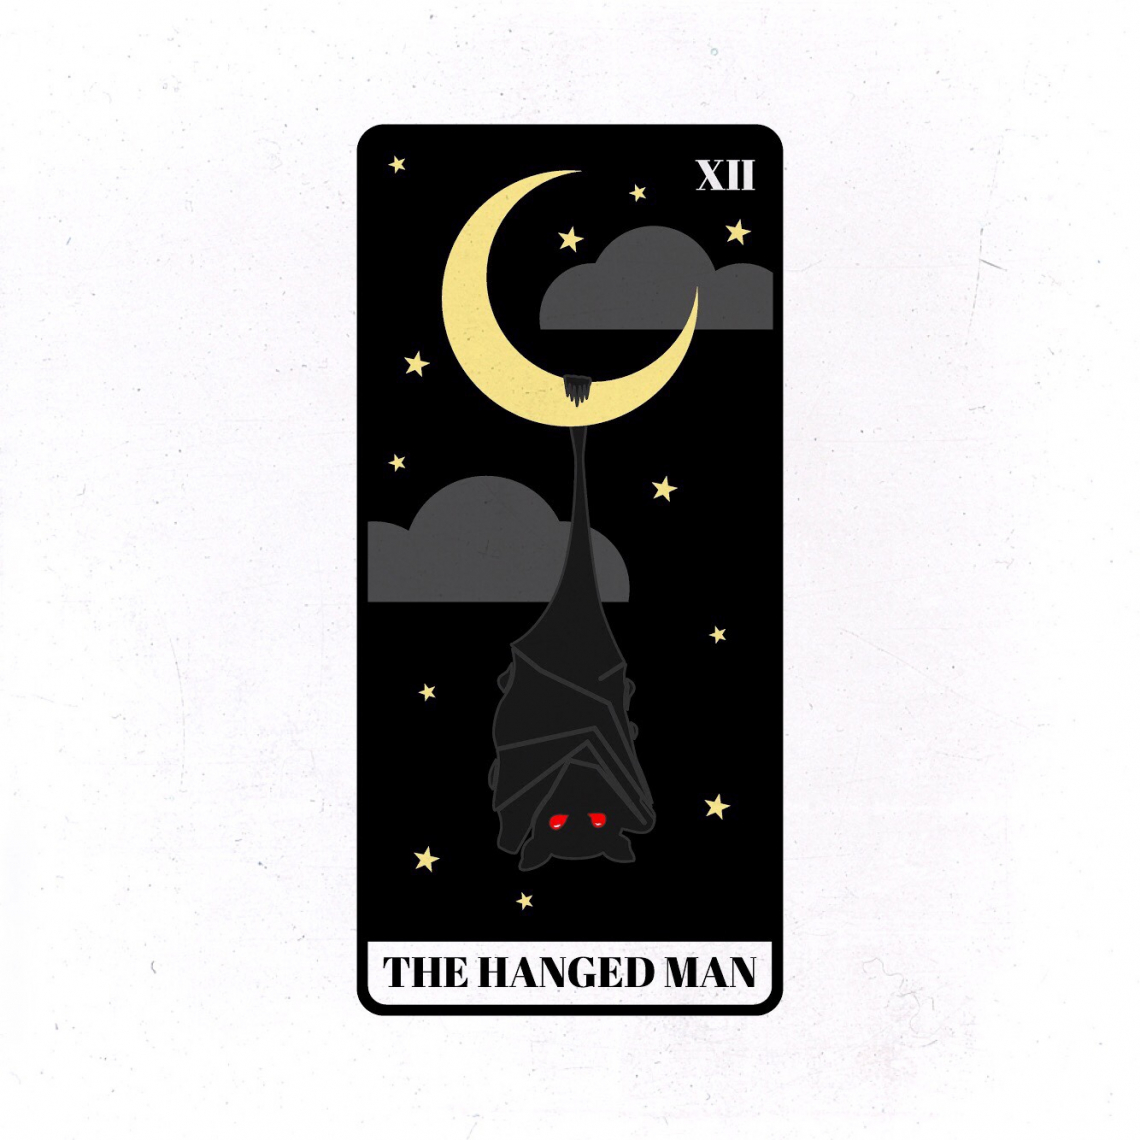 XII. The Hanged Man